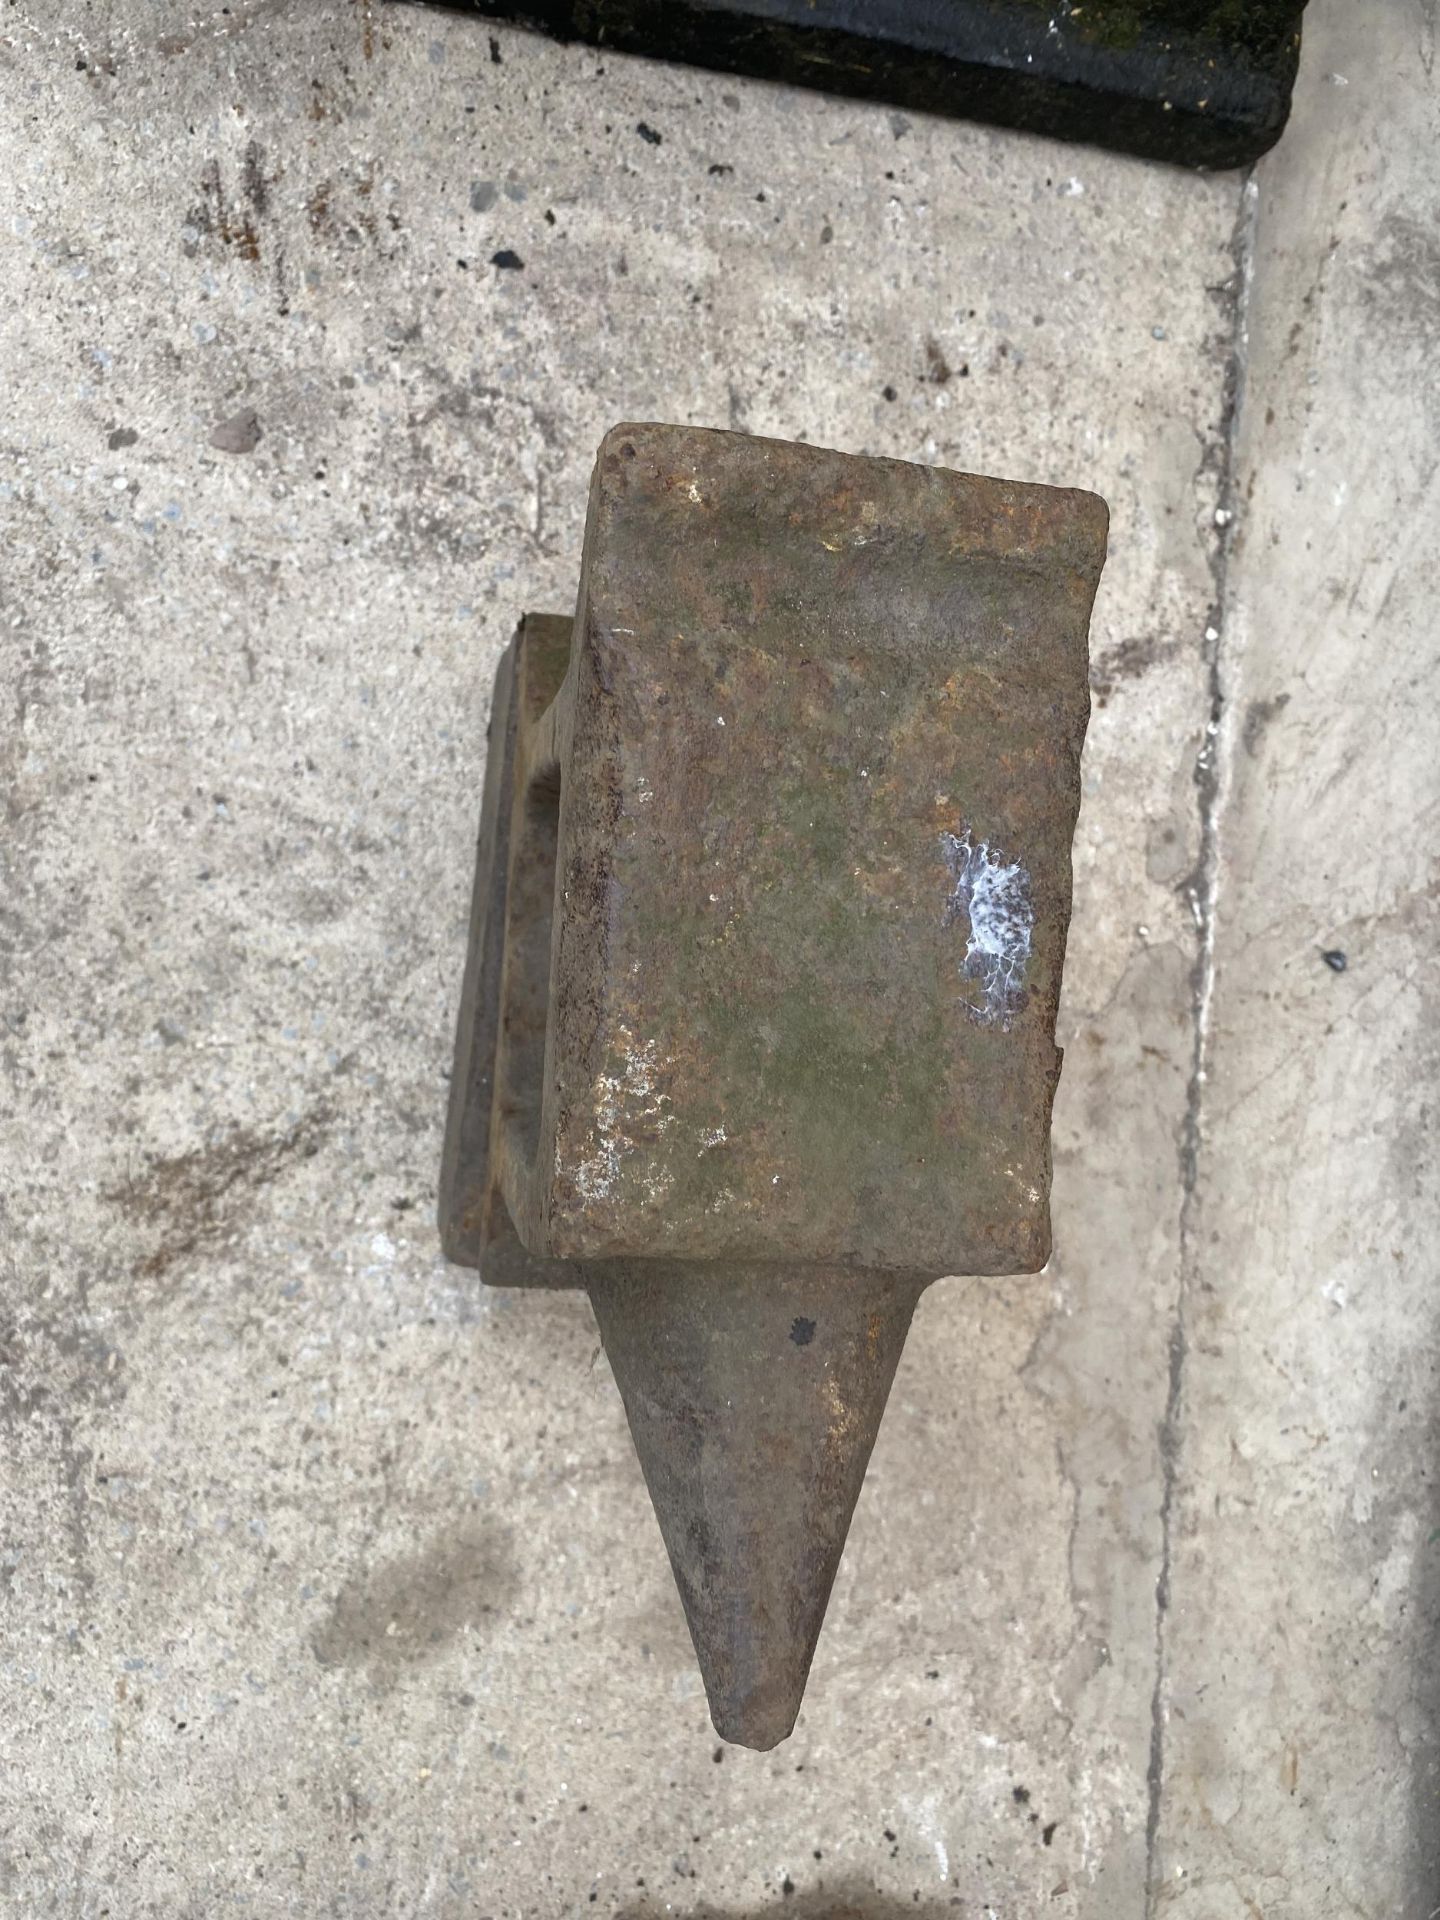 A SMALL VINTAGE CAST IRON DOUBLE SIDED BLACKSMITHS ANVIL WITH CAST IRON BASE STAND(H:25CM L:28CM) - Image 2 of 3